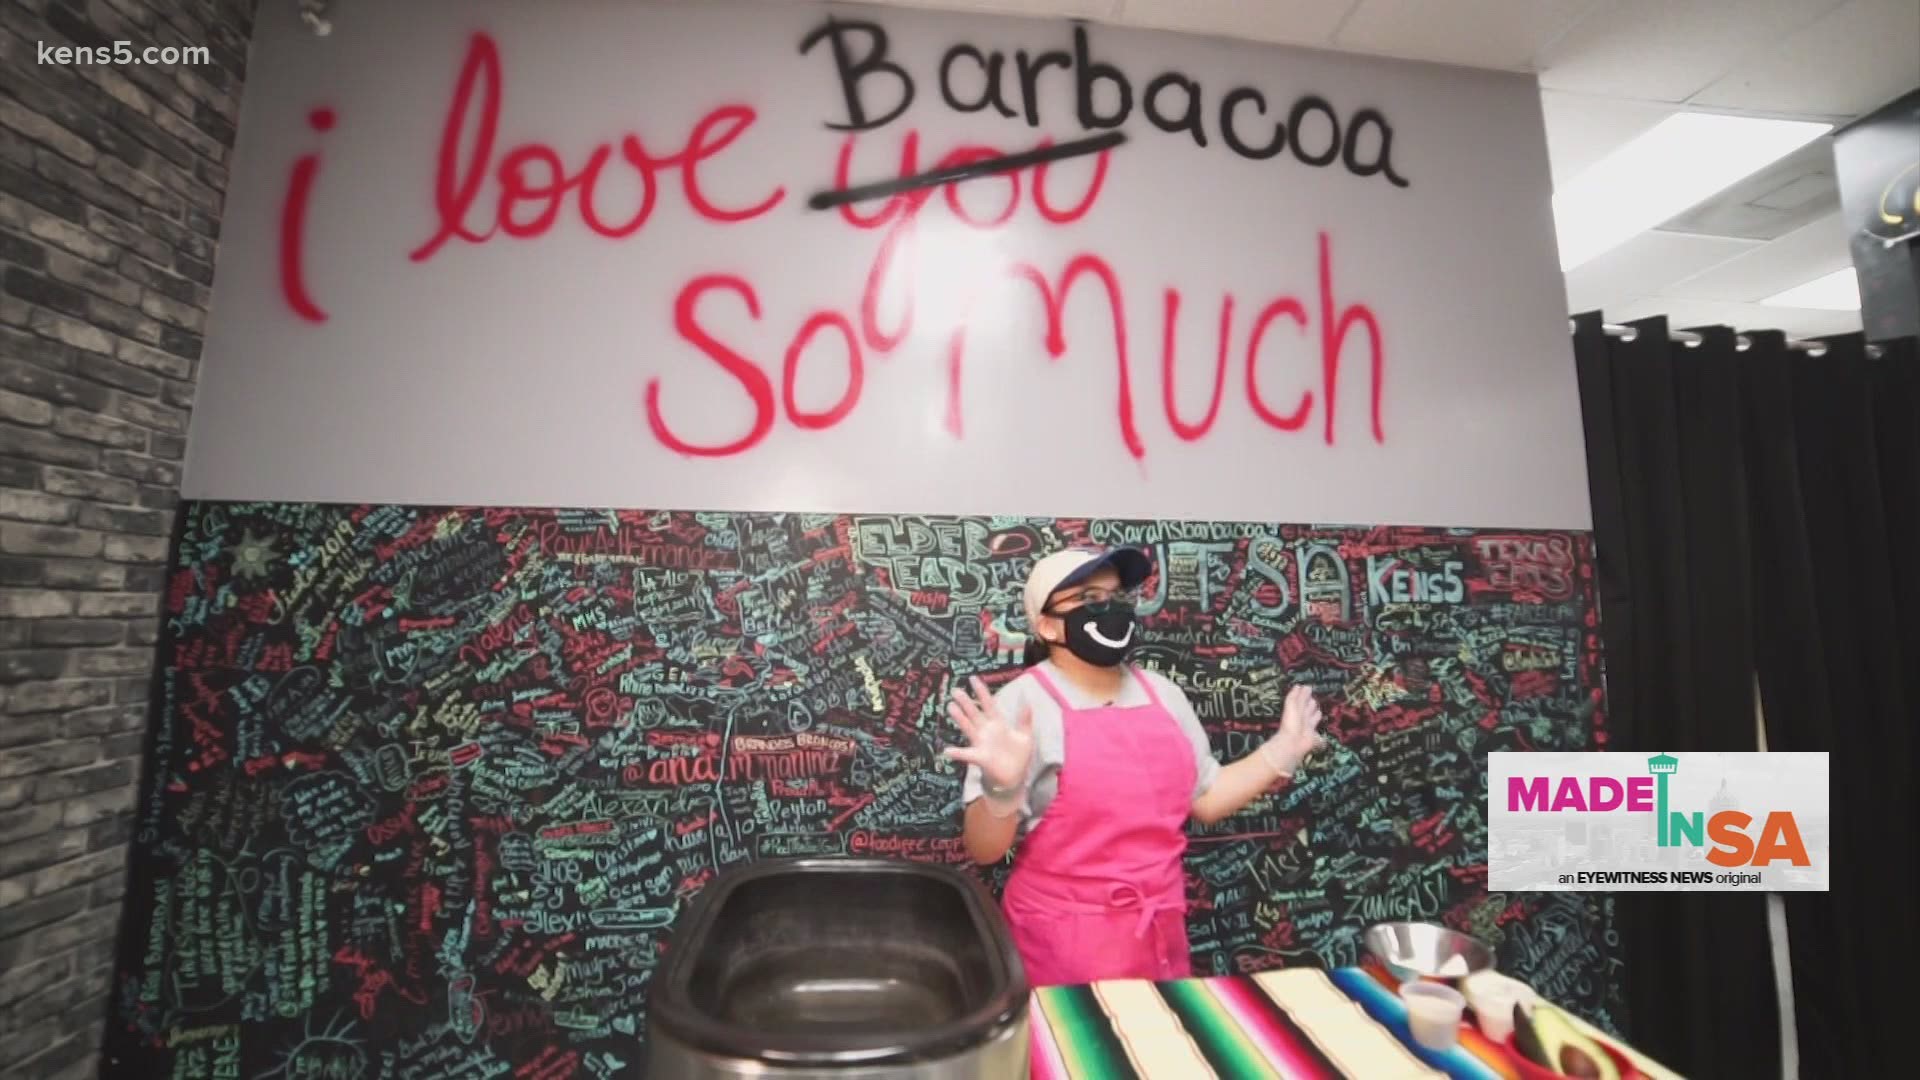 A just 16-years-old, Sarah opened up Sarah's Barbacoa because she wanted to add some flavor to her area. The business is a hit - typically selling out in hours.